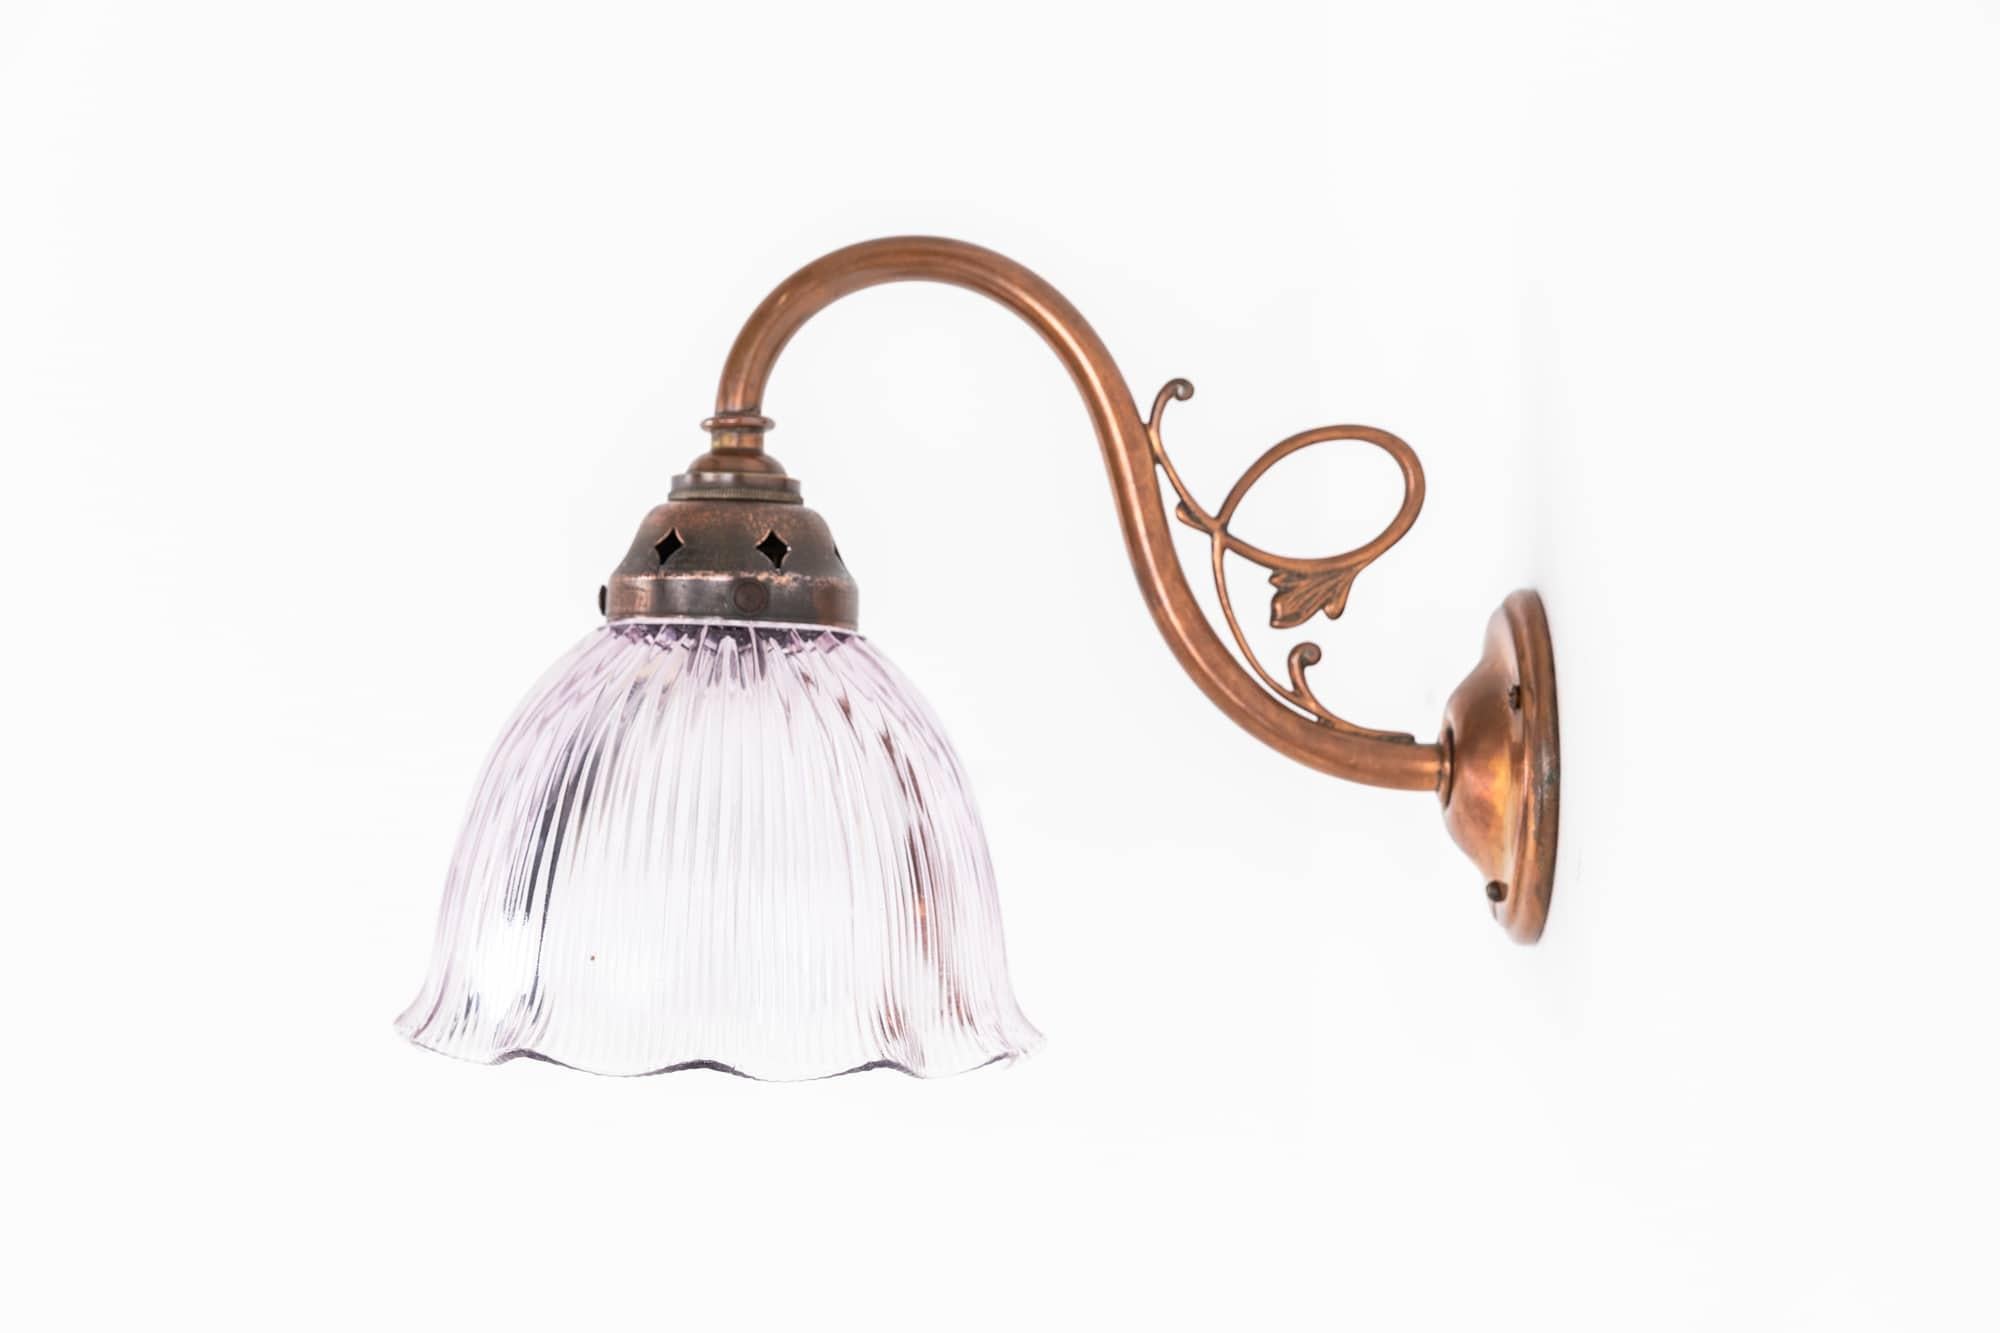 

A beautiful diminutive wall sconce made in England by Sunco. c.1930

Constructed from brass with copper plate and cast decorative detail. Complemented by a equally as elegant violet tinted Holophane Stiletto glass shade.

Rewired to connect to